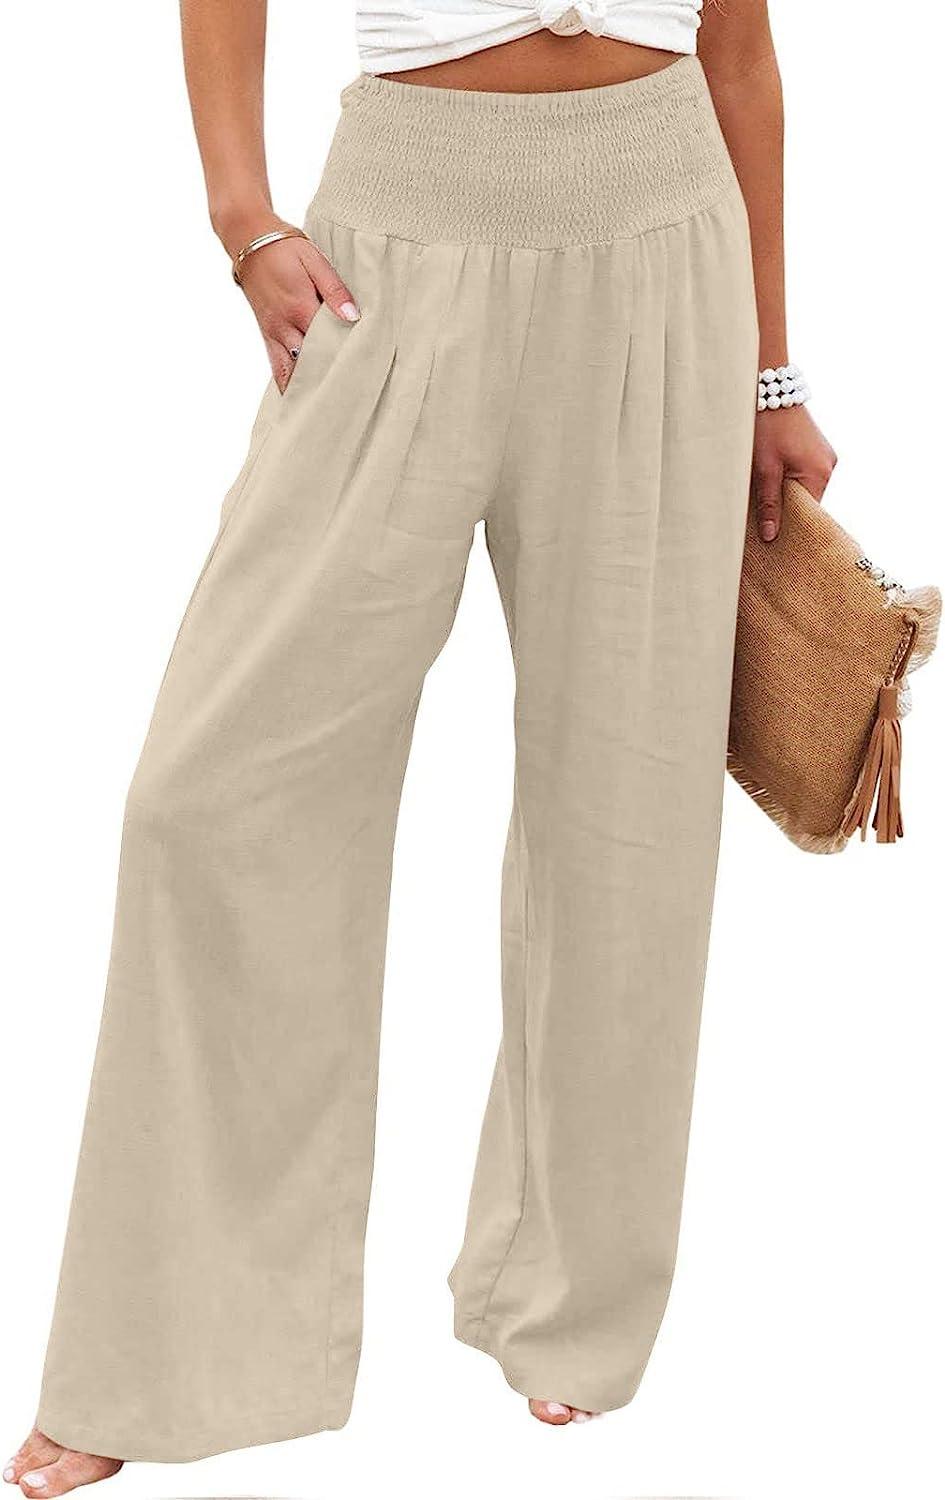 Amazon.com: High Waisted Dress Pants for Women Cotton Linen Summer Pants  Casual Lightweight Plus Size Drawstring Wide Leg Pant Loose Fit Lounge  Trousers : Sports & Outdoors